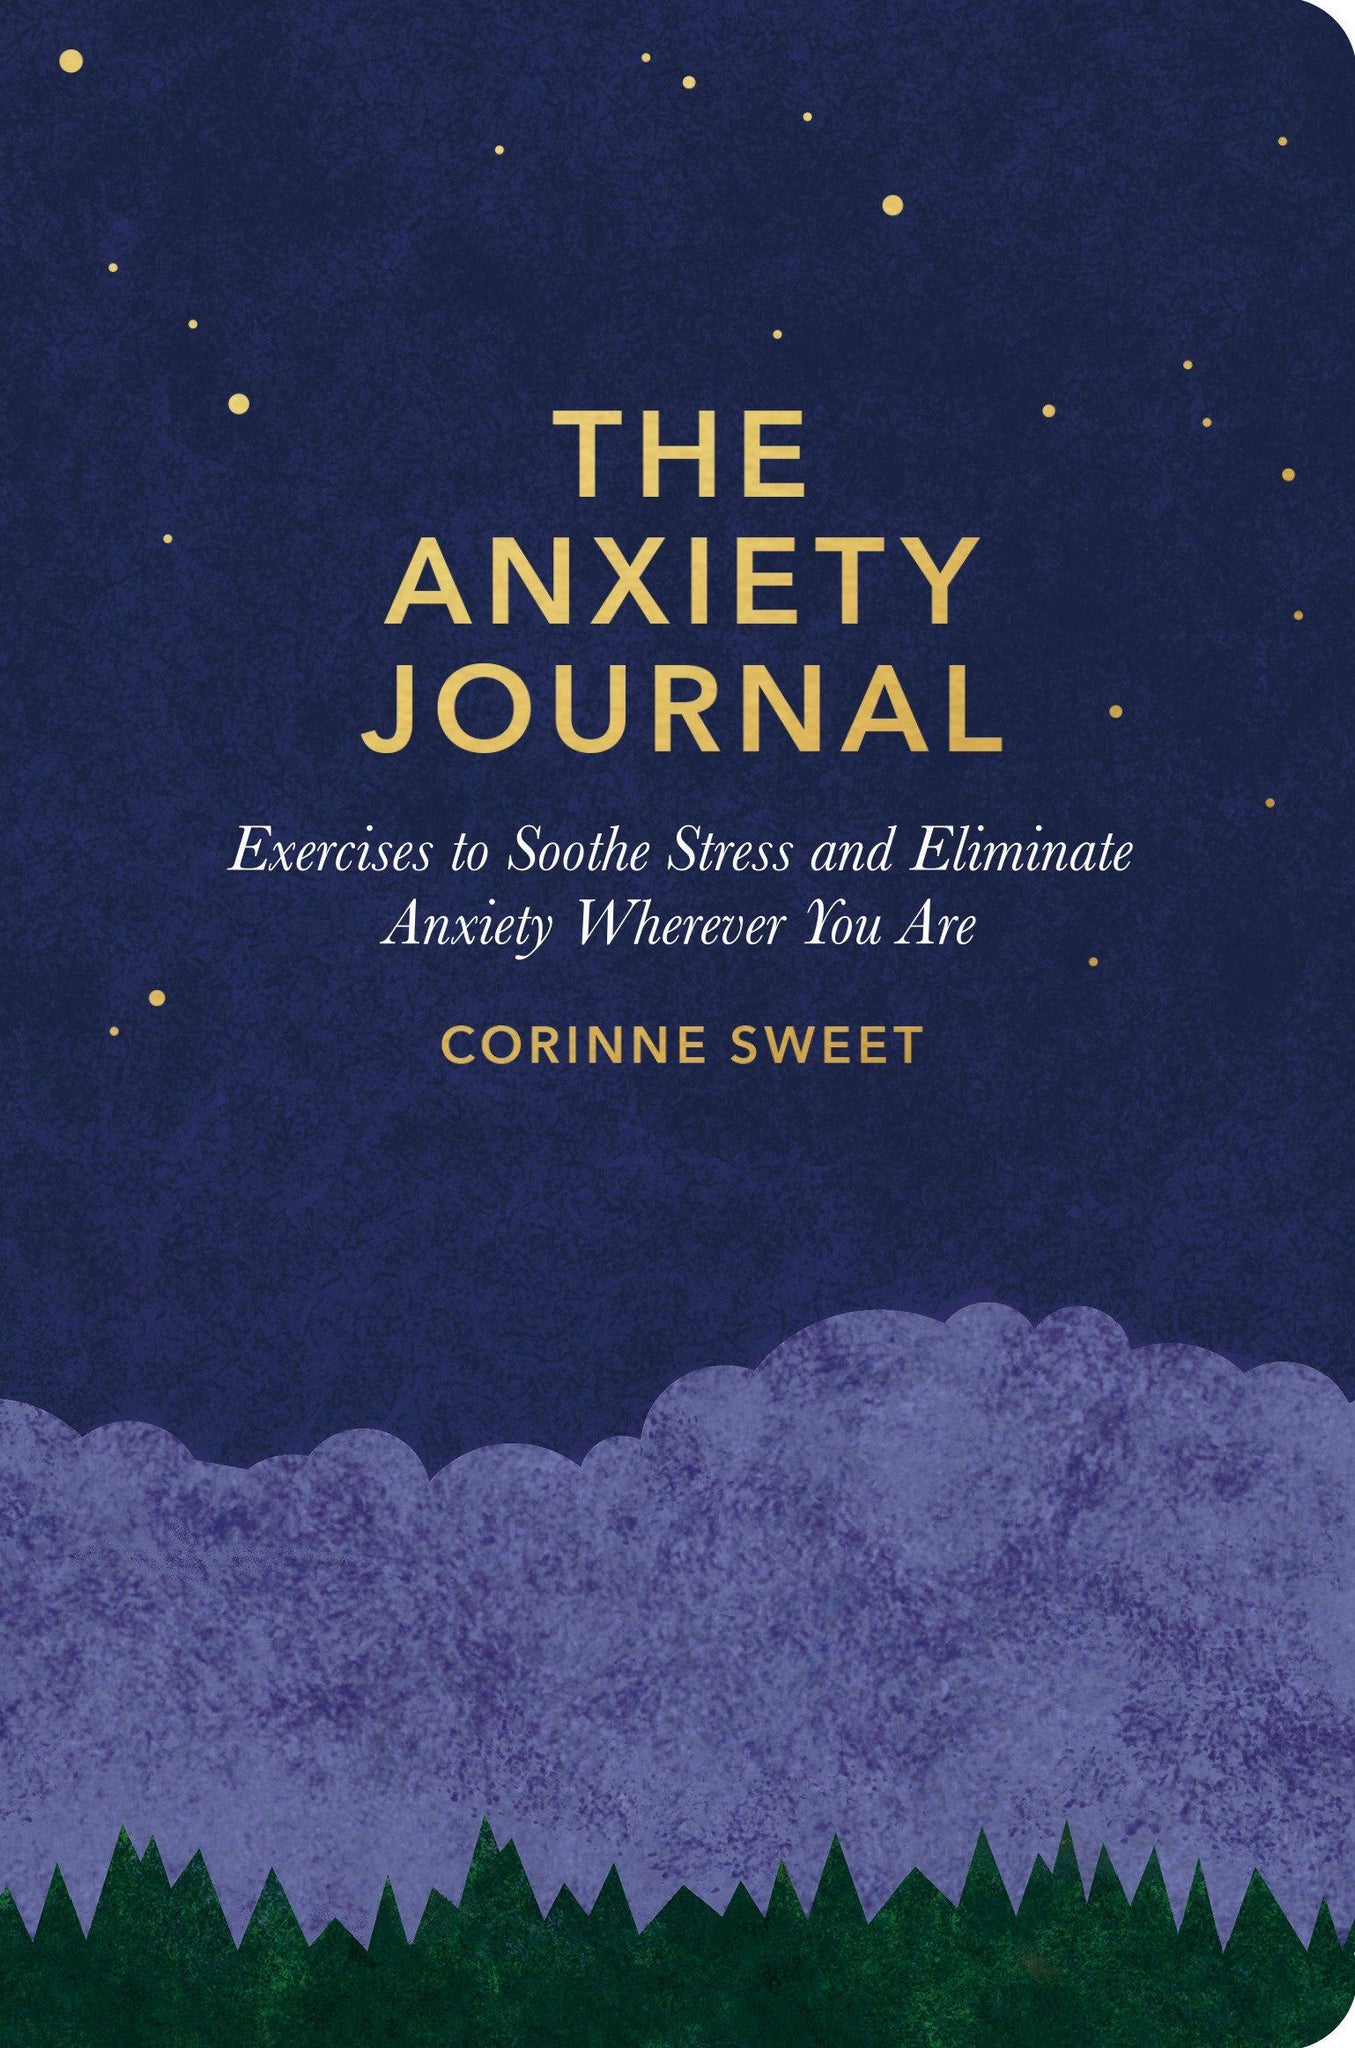 ANXIETY JOURNAL